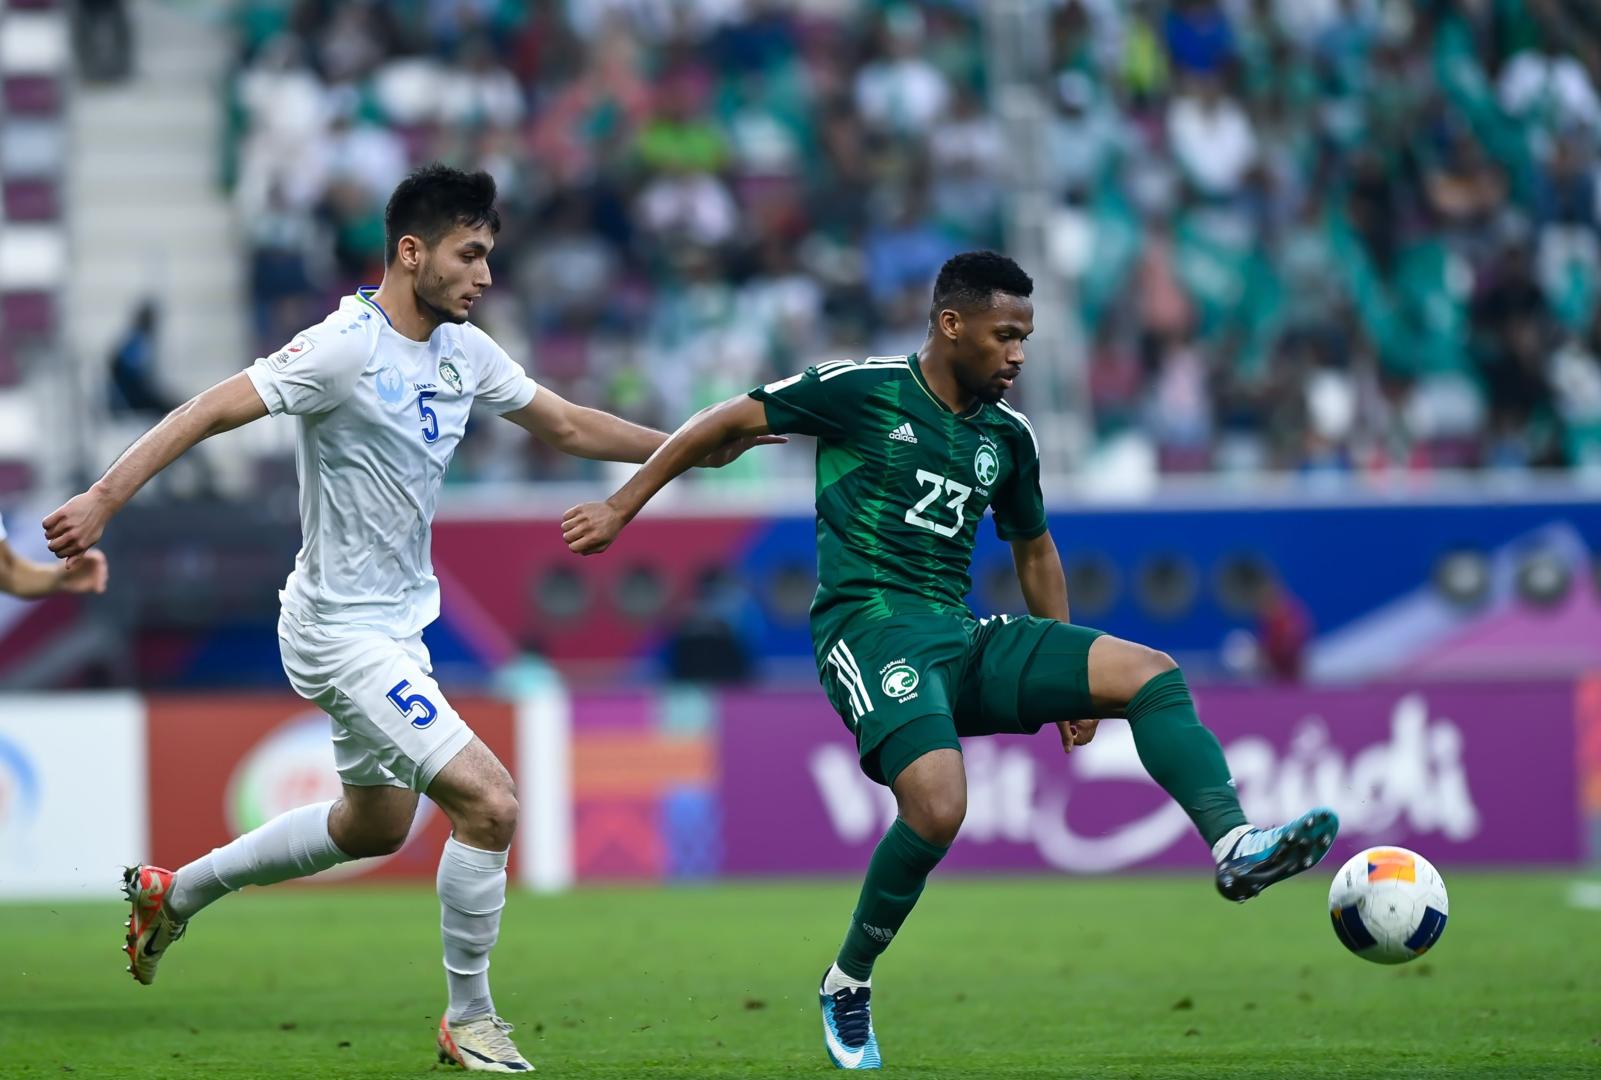 Green Team Exits the U-23 Asian Cup After Defeat by Uzbekistan in the Quarterfinals